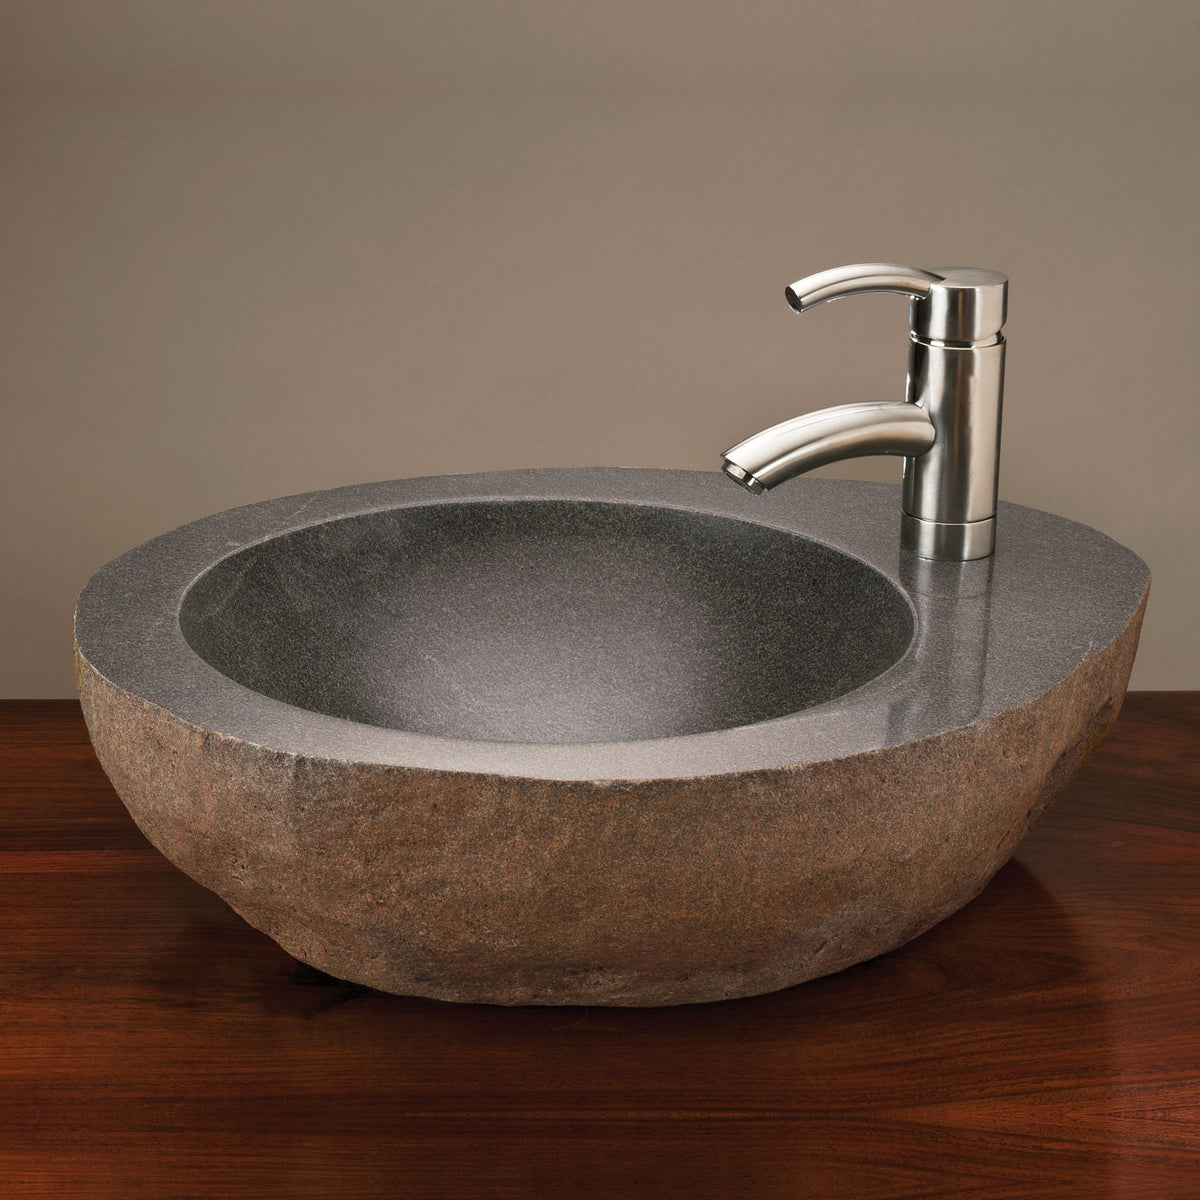 Natural Vessel with faucet mount image 1 of 1